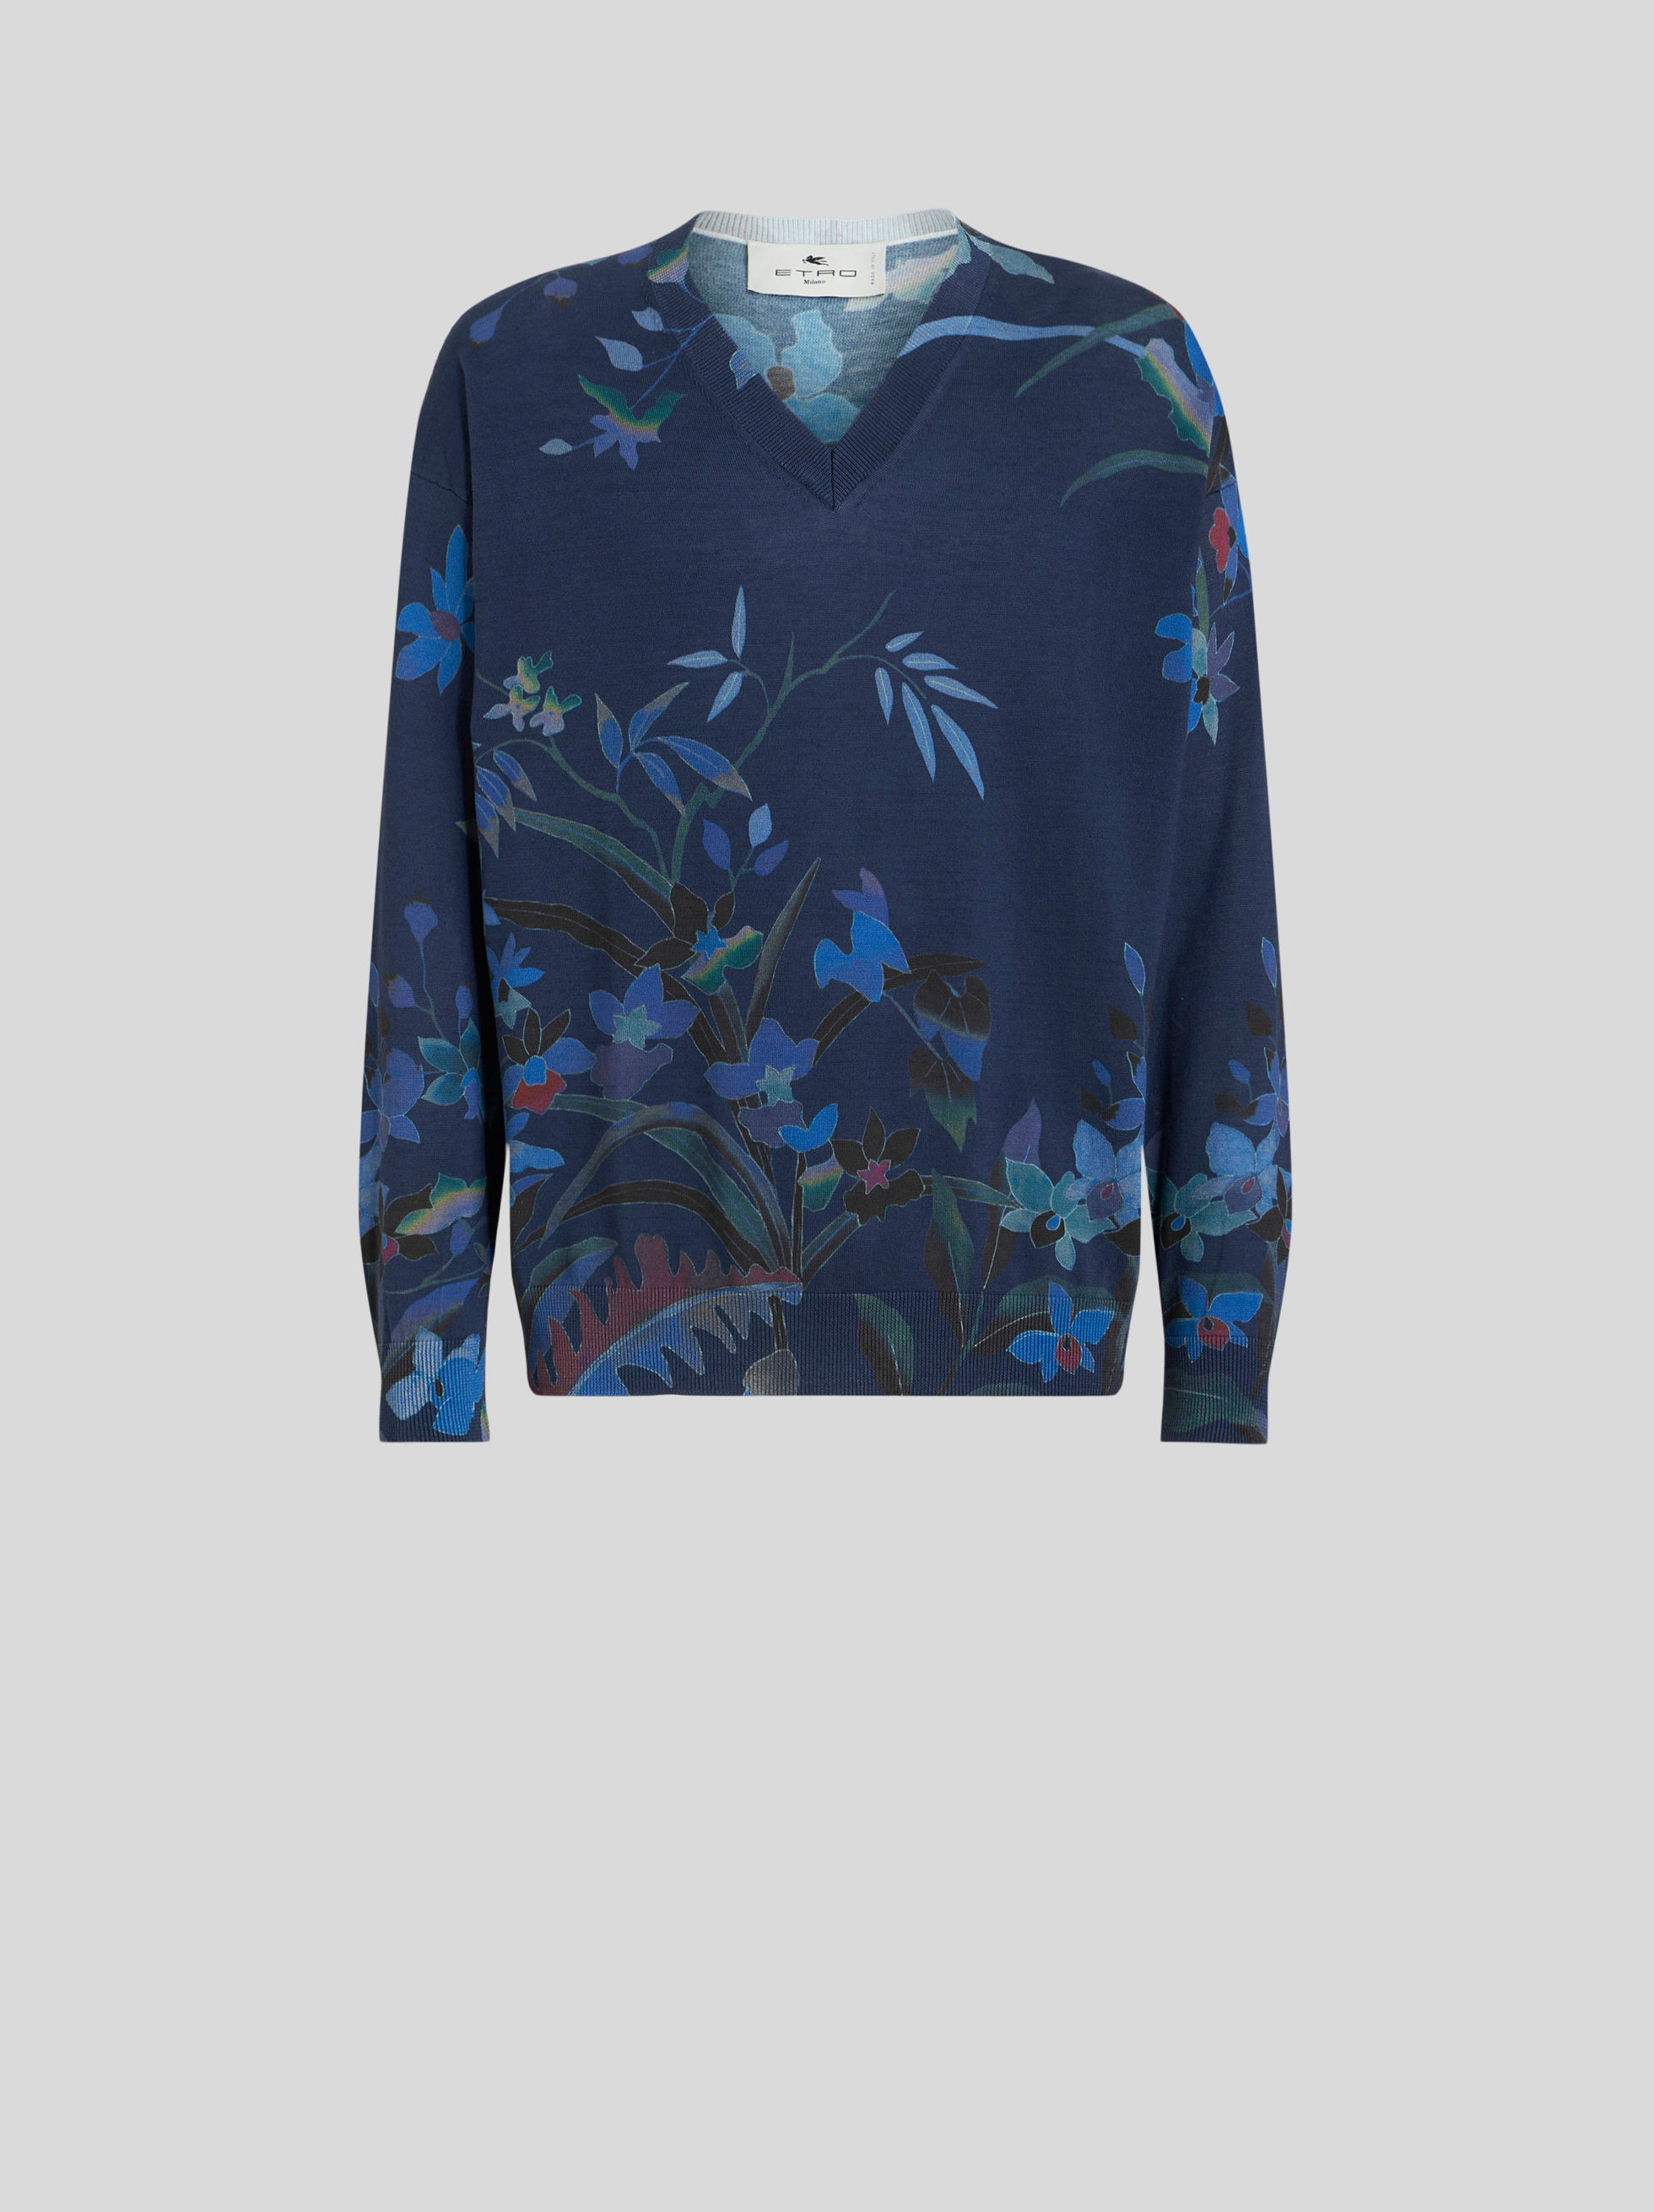 JUMPER WITH LEAFY FLORAL PRINT